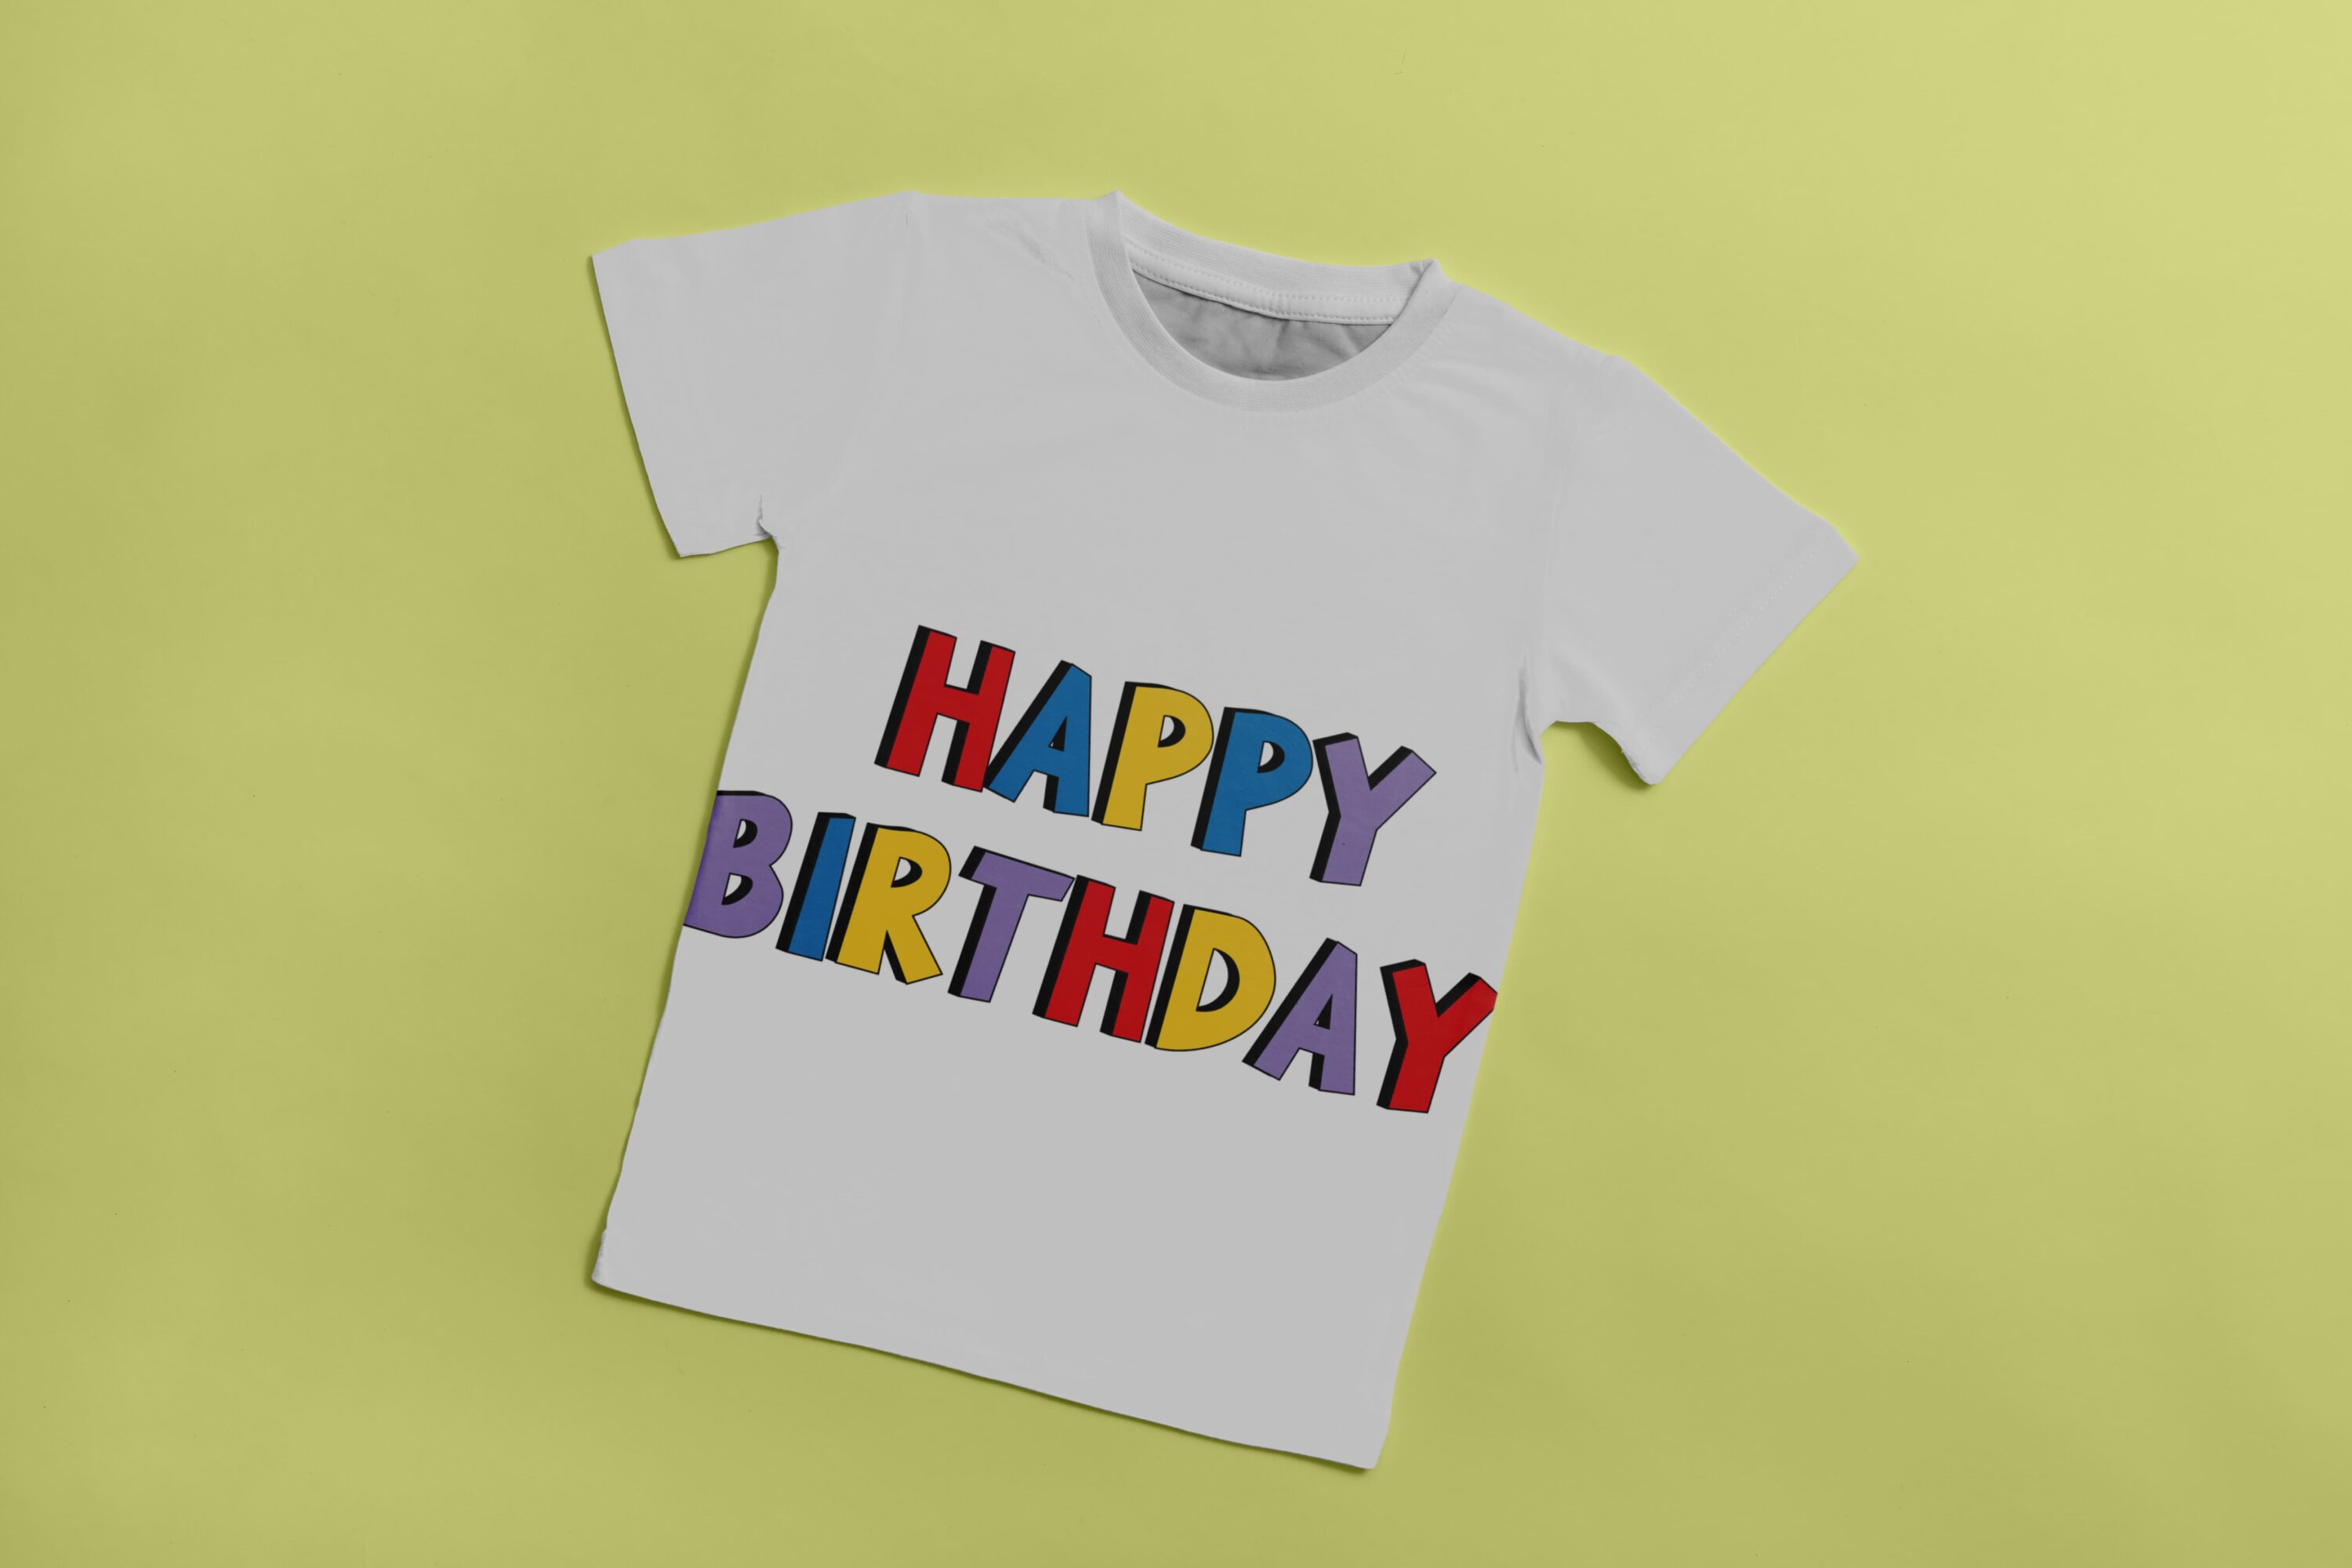 White T-shirt with the colorful lettering "Happy birthday".